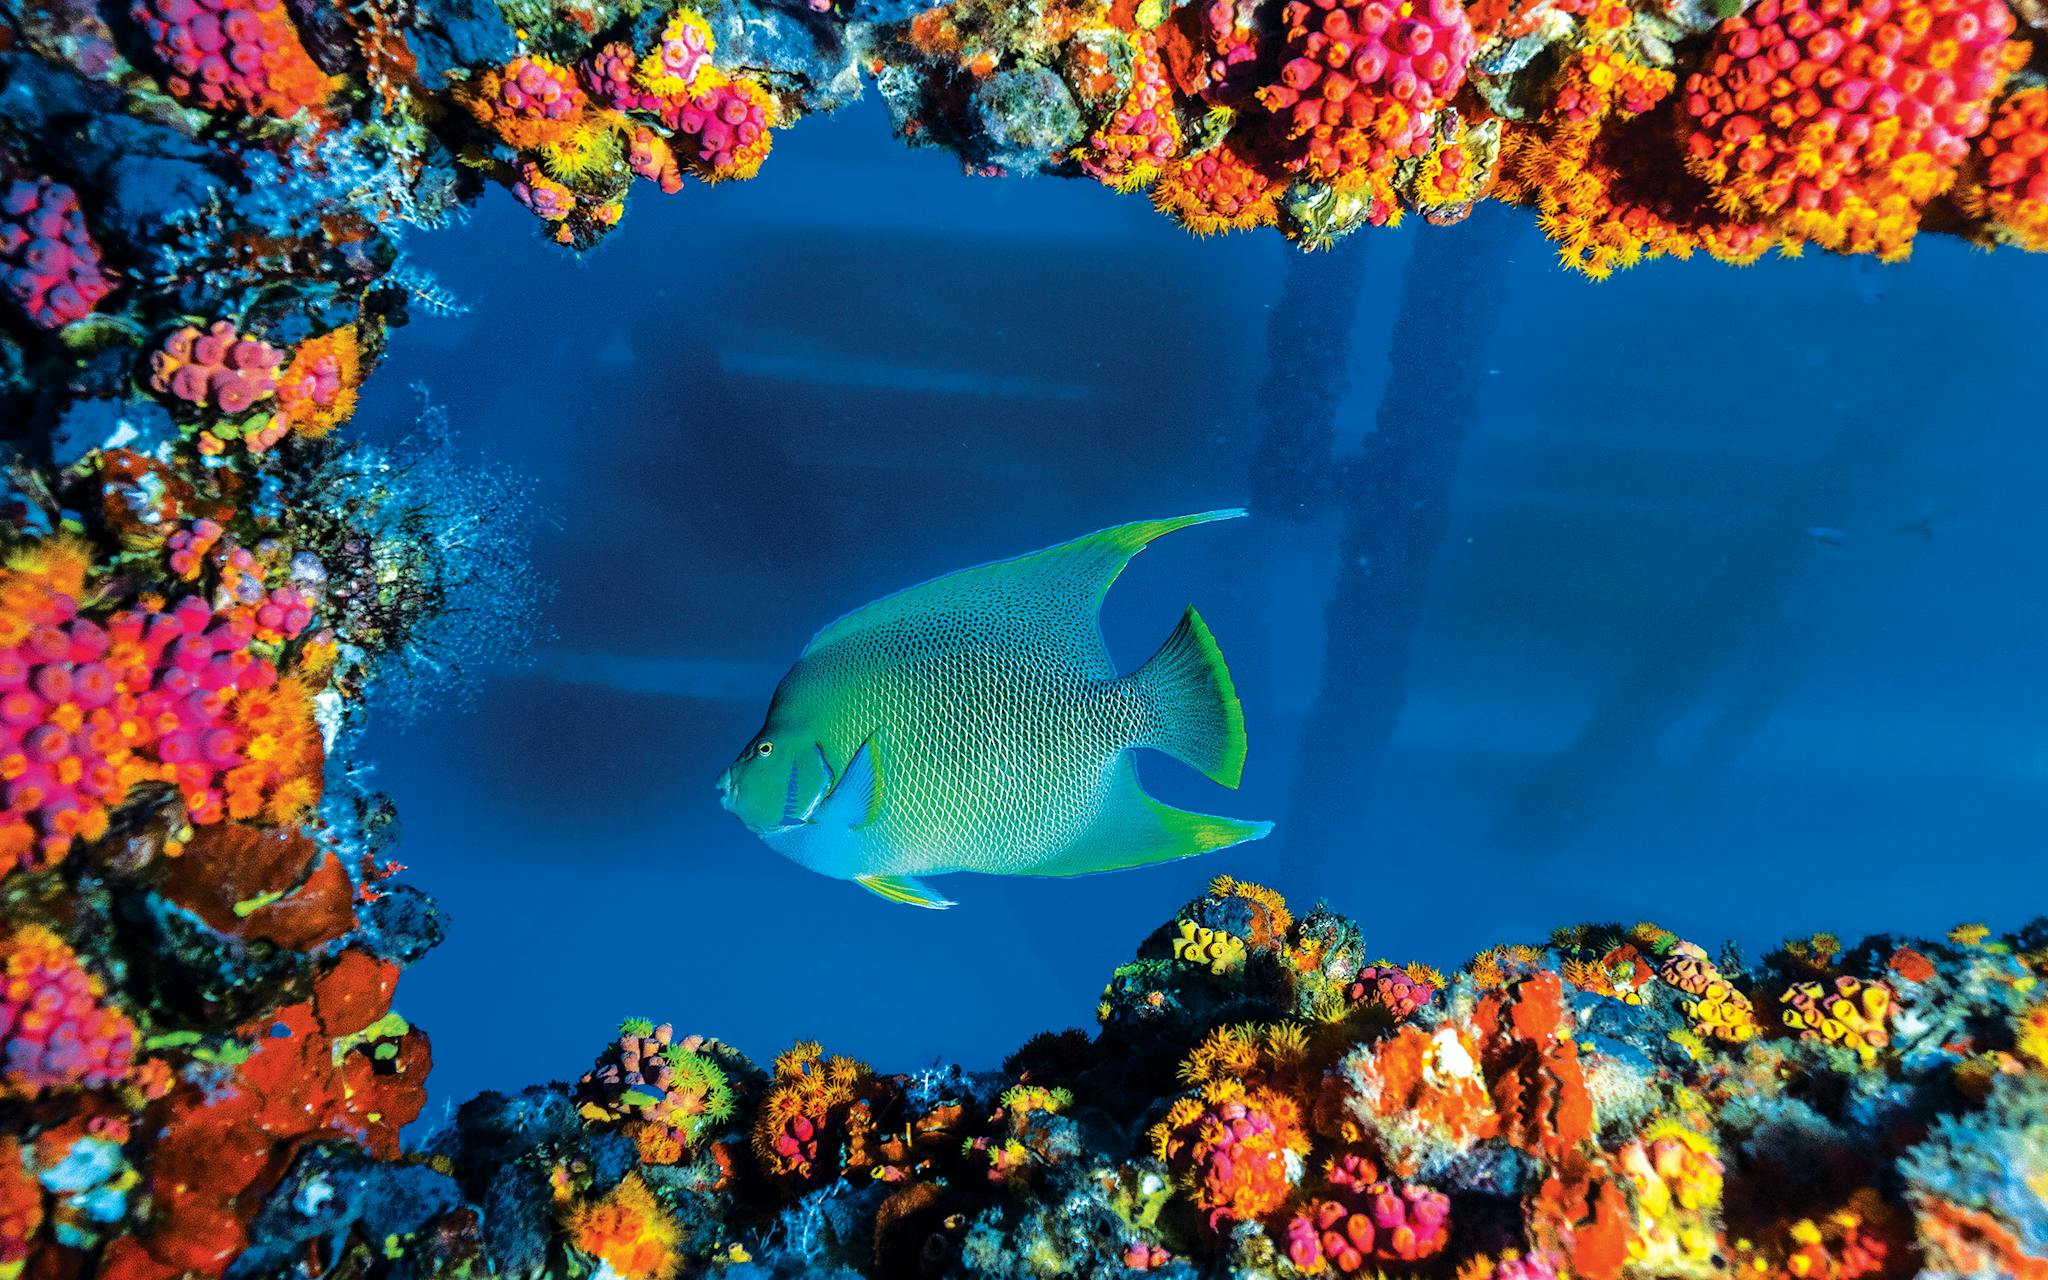 A blue angelfish framed by orange cup coral, which thrives on structures such as oil platforms and shipwrecks.